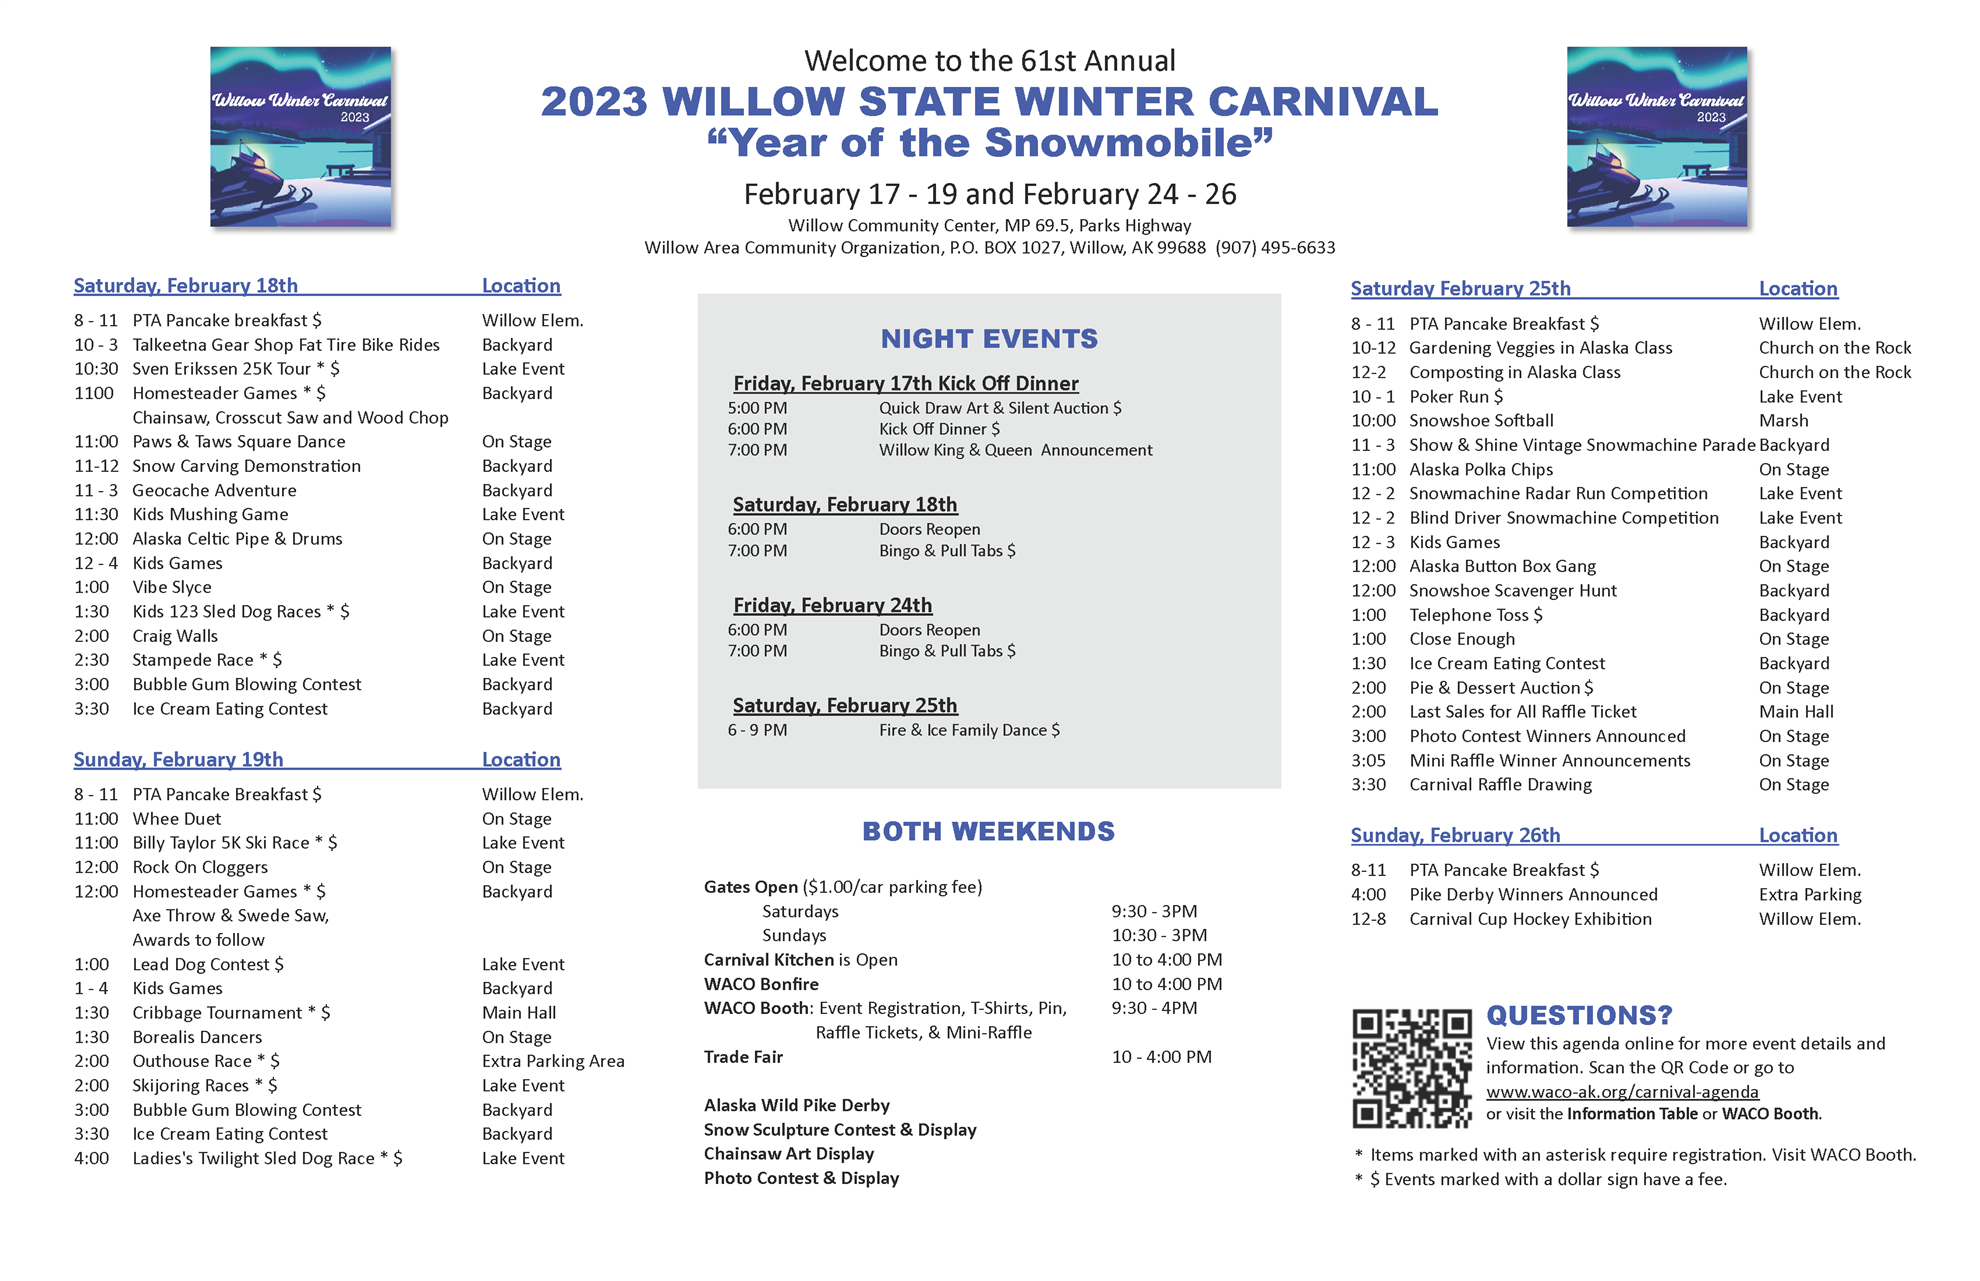 Willow Winter Carnival Schedule of Events Rotary Club of Susitna, Alaska